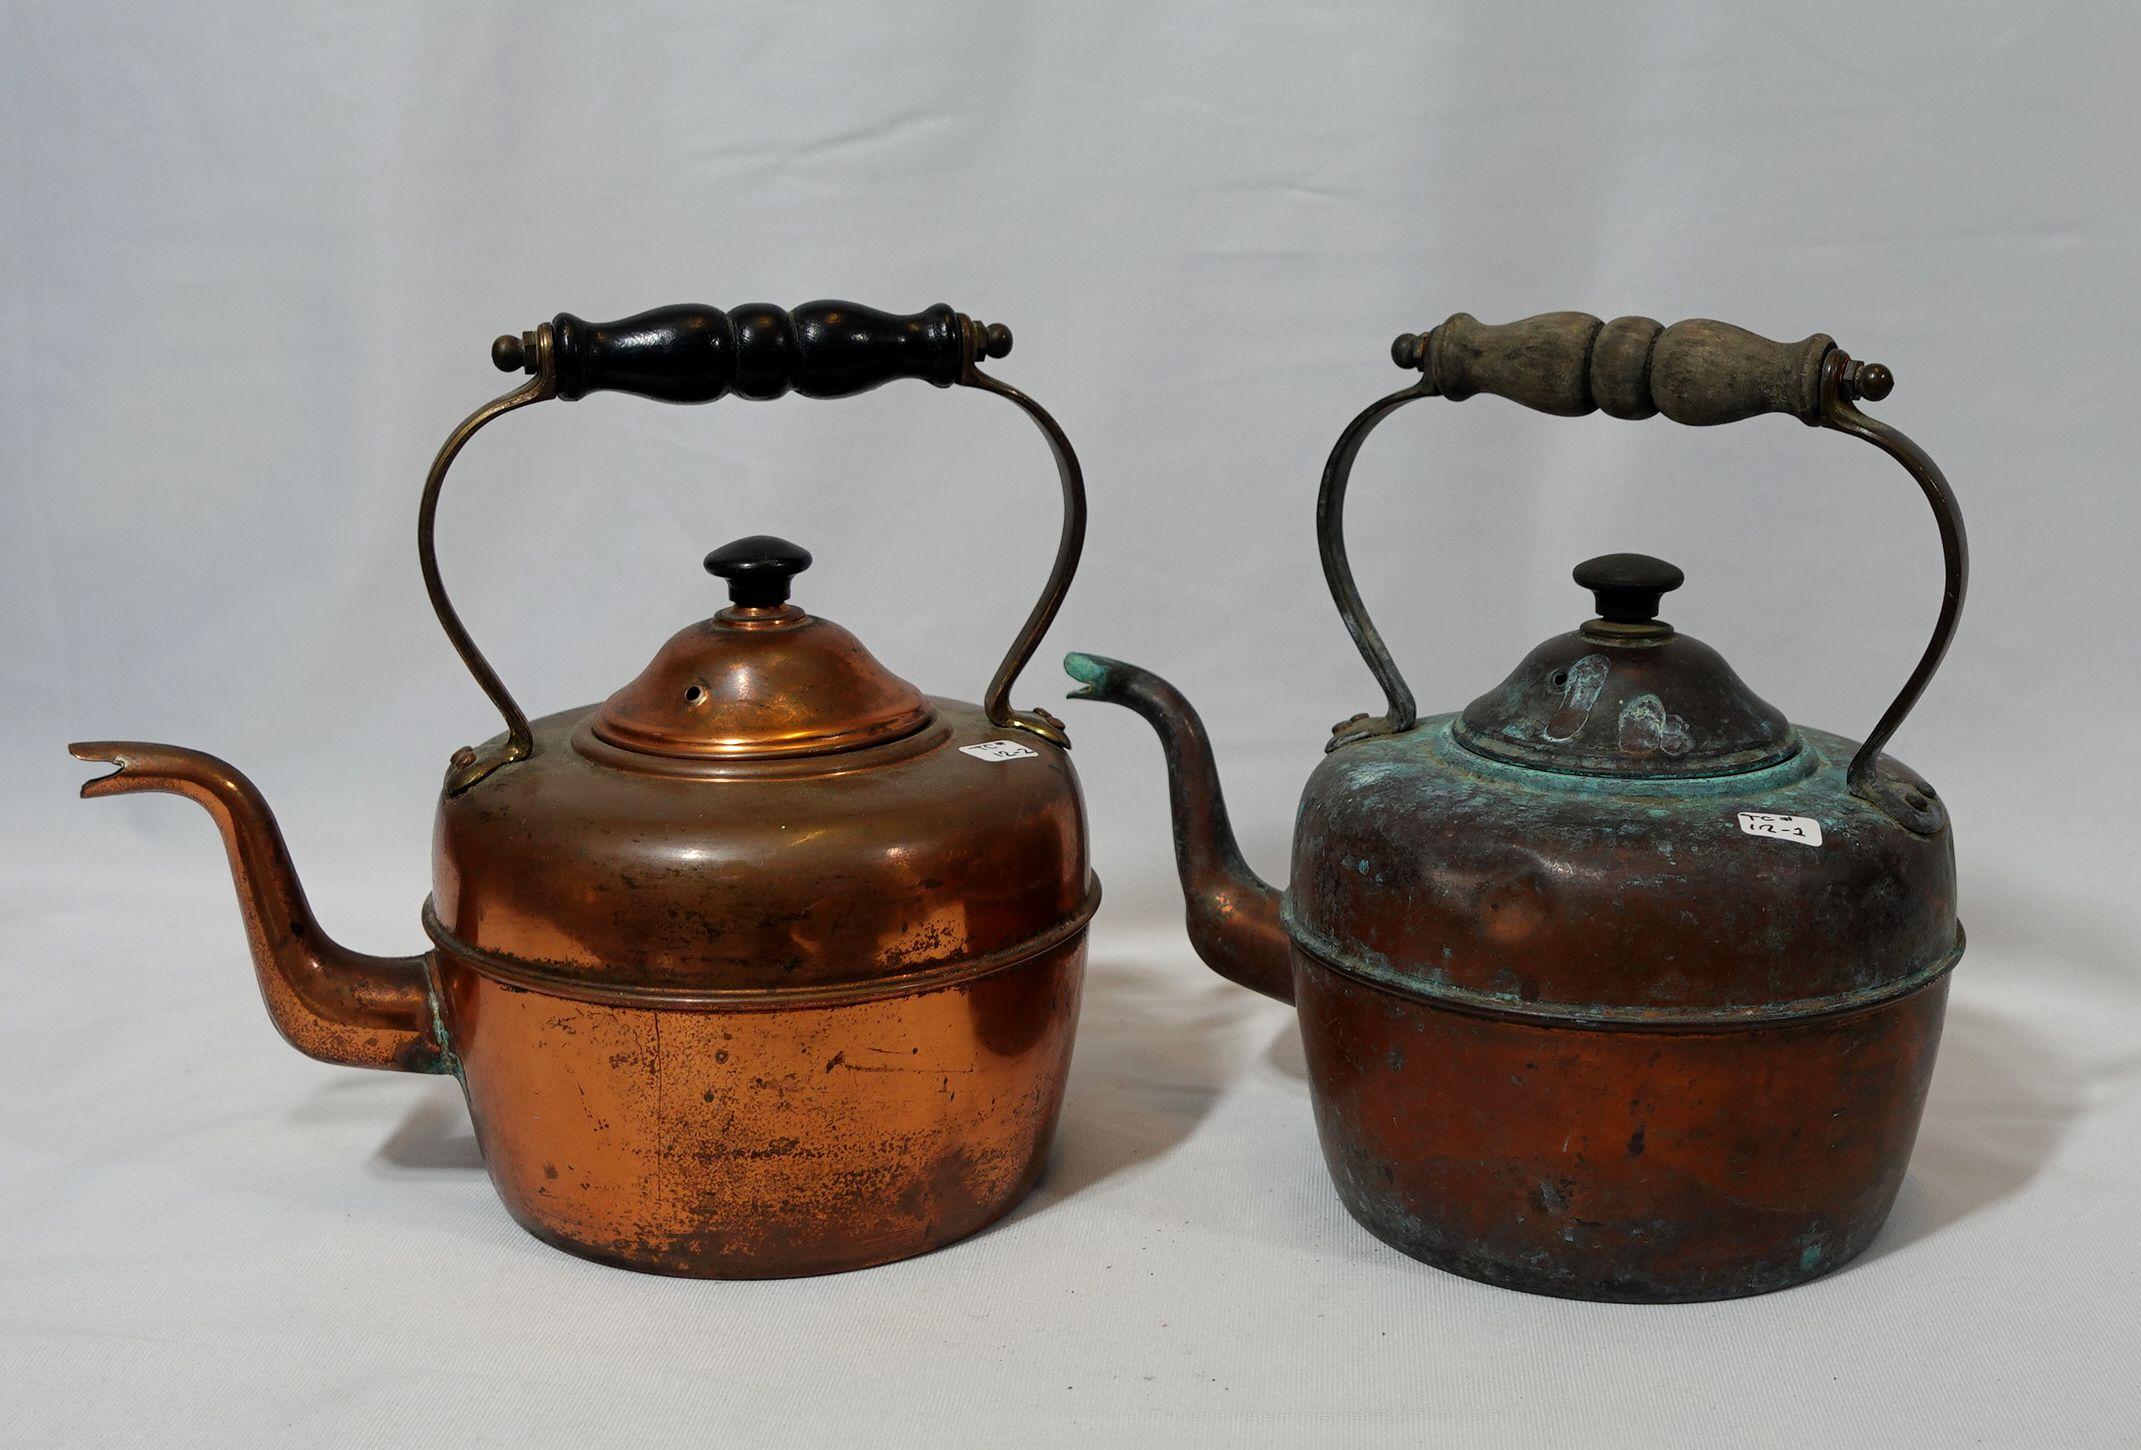 Hand-hammered a pair of copper tea kettles made in England from the 19th/early 20th century, very well hand-made with delicate craftsmanship, and highly collectible antique.
